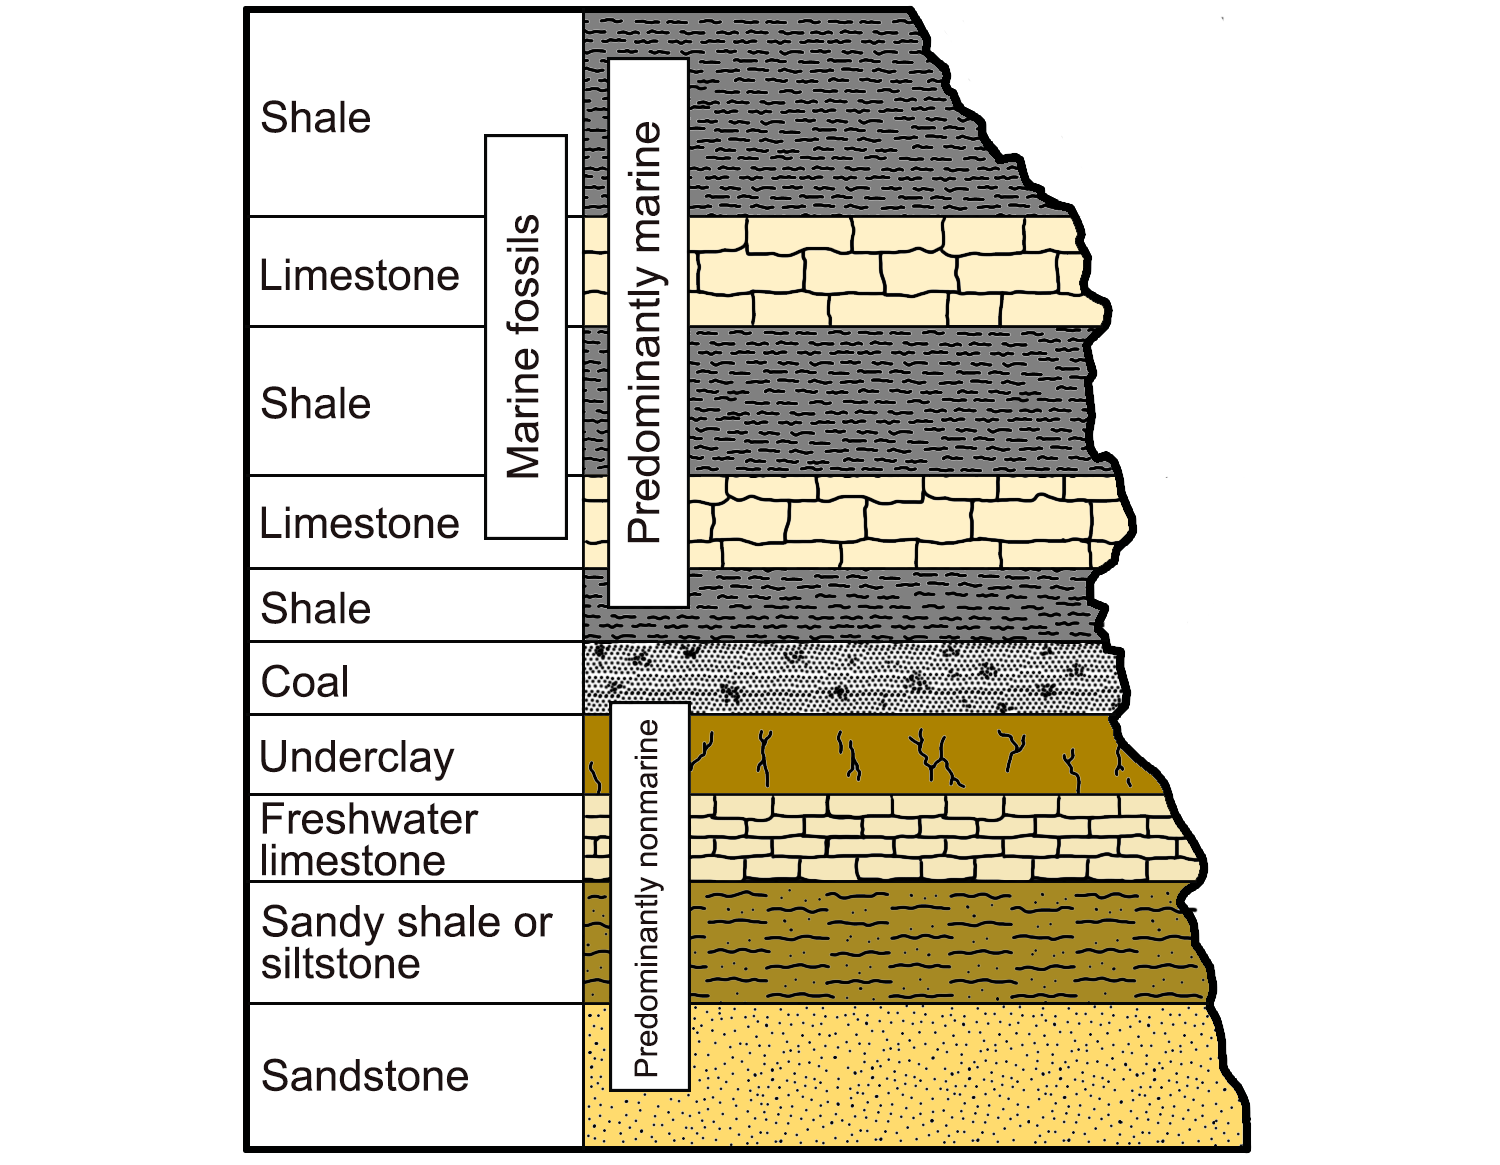 Diagram of a cyclothem showing layers of alternating marine limestones and shales over layers of coal and other nonmarine deposits.